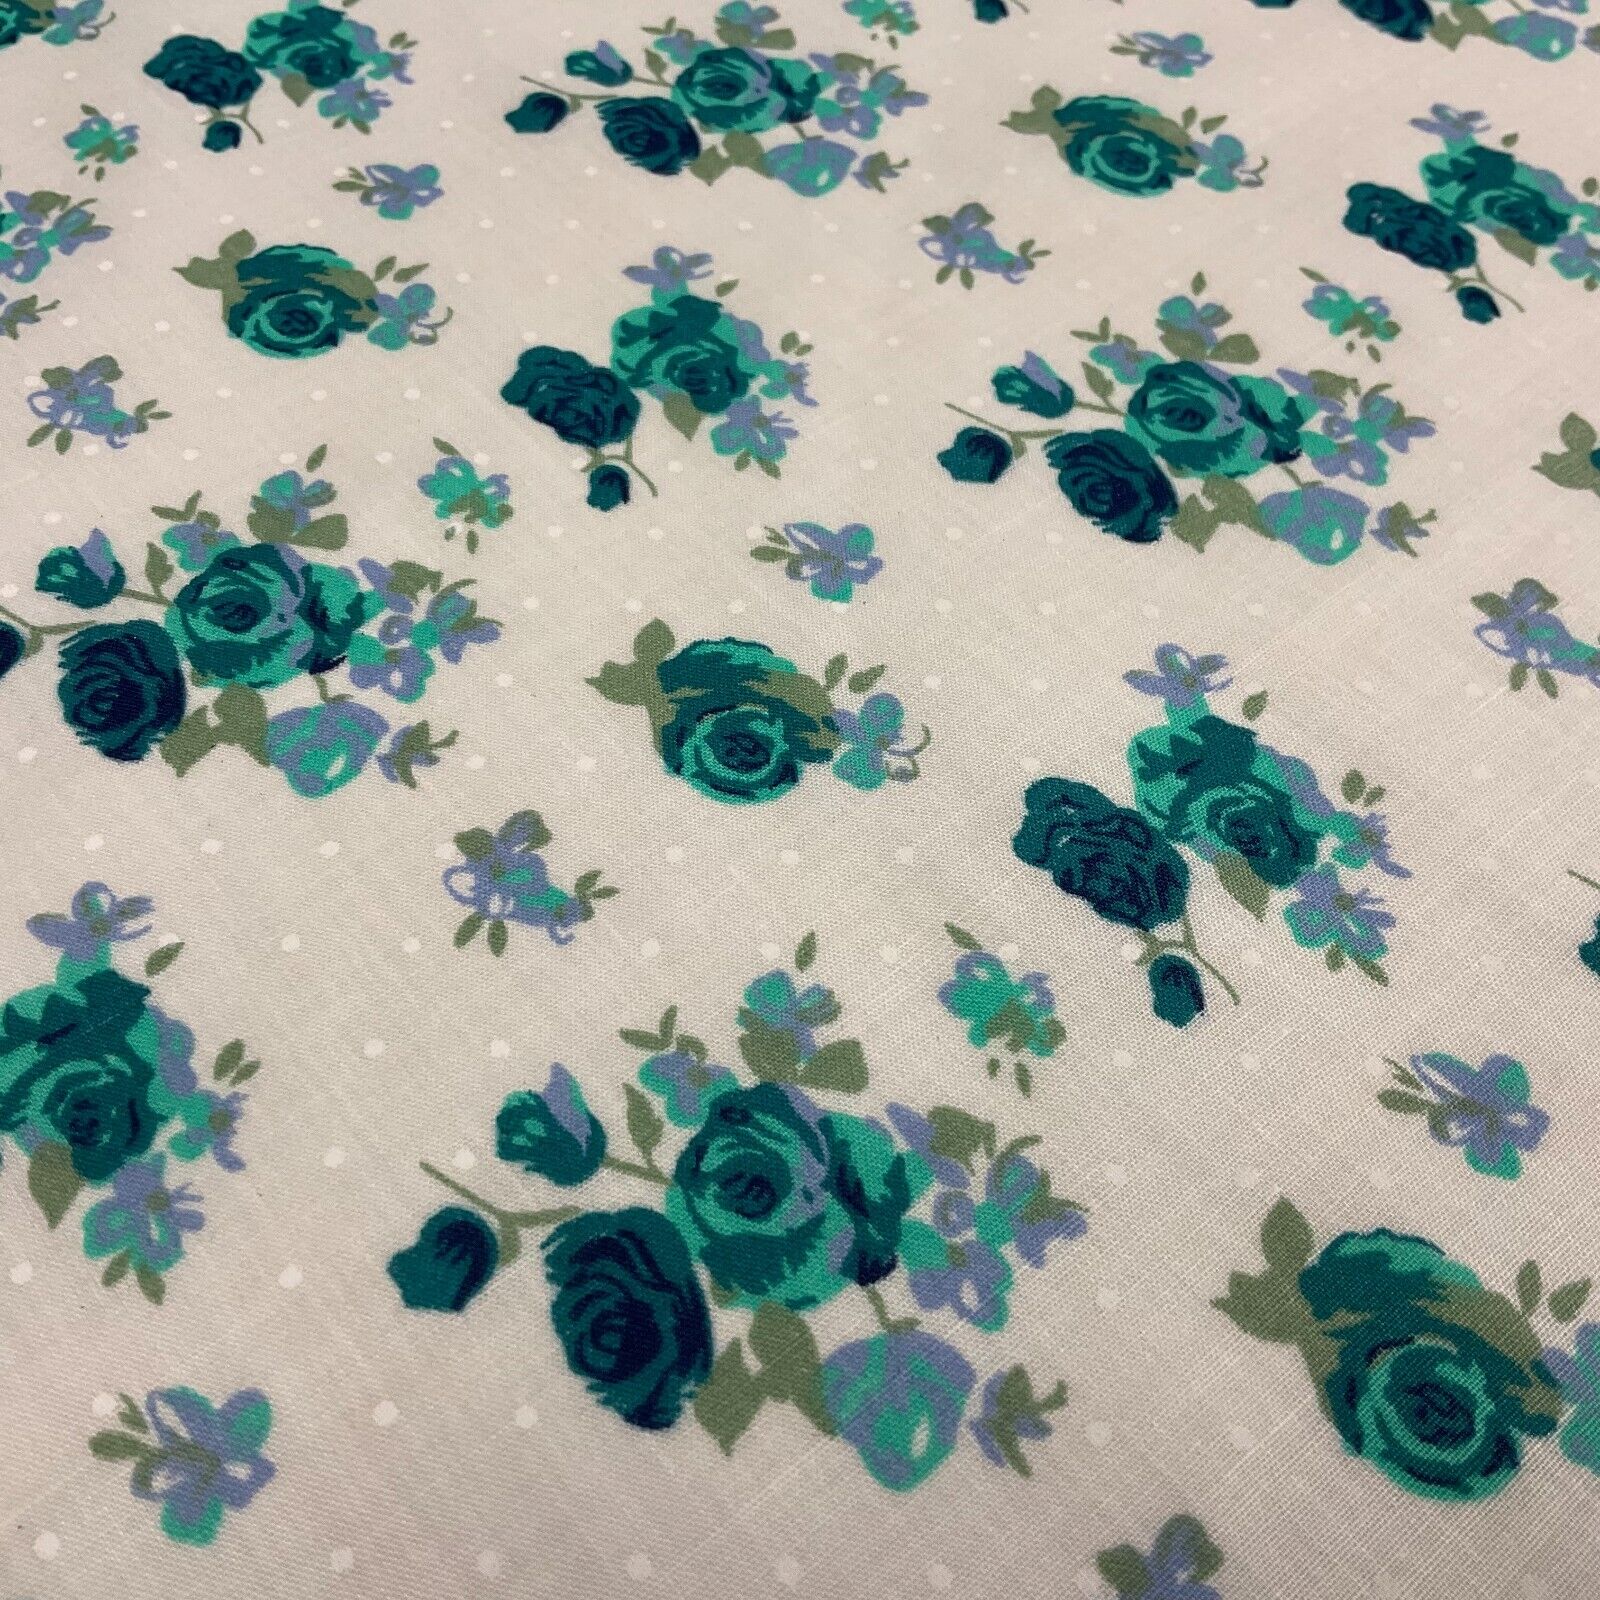 Vintage Floral Roses printed Poly cotton fabric 110cm Wide M1704